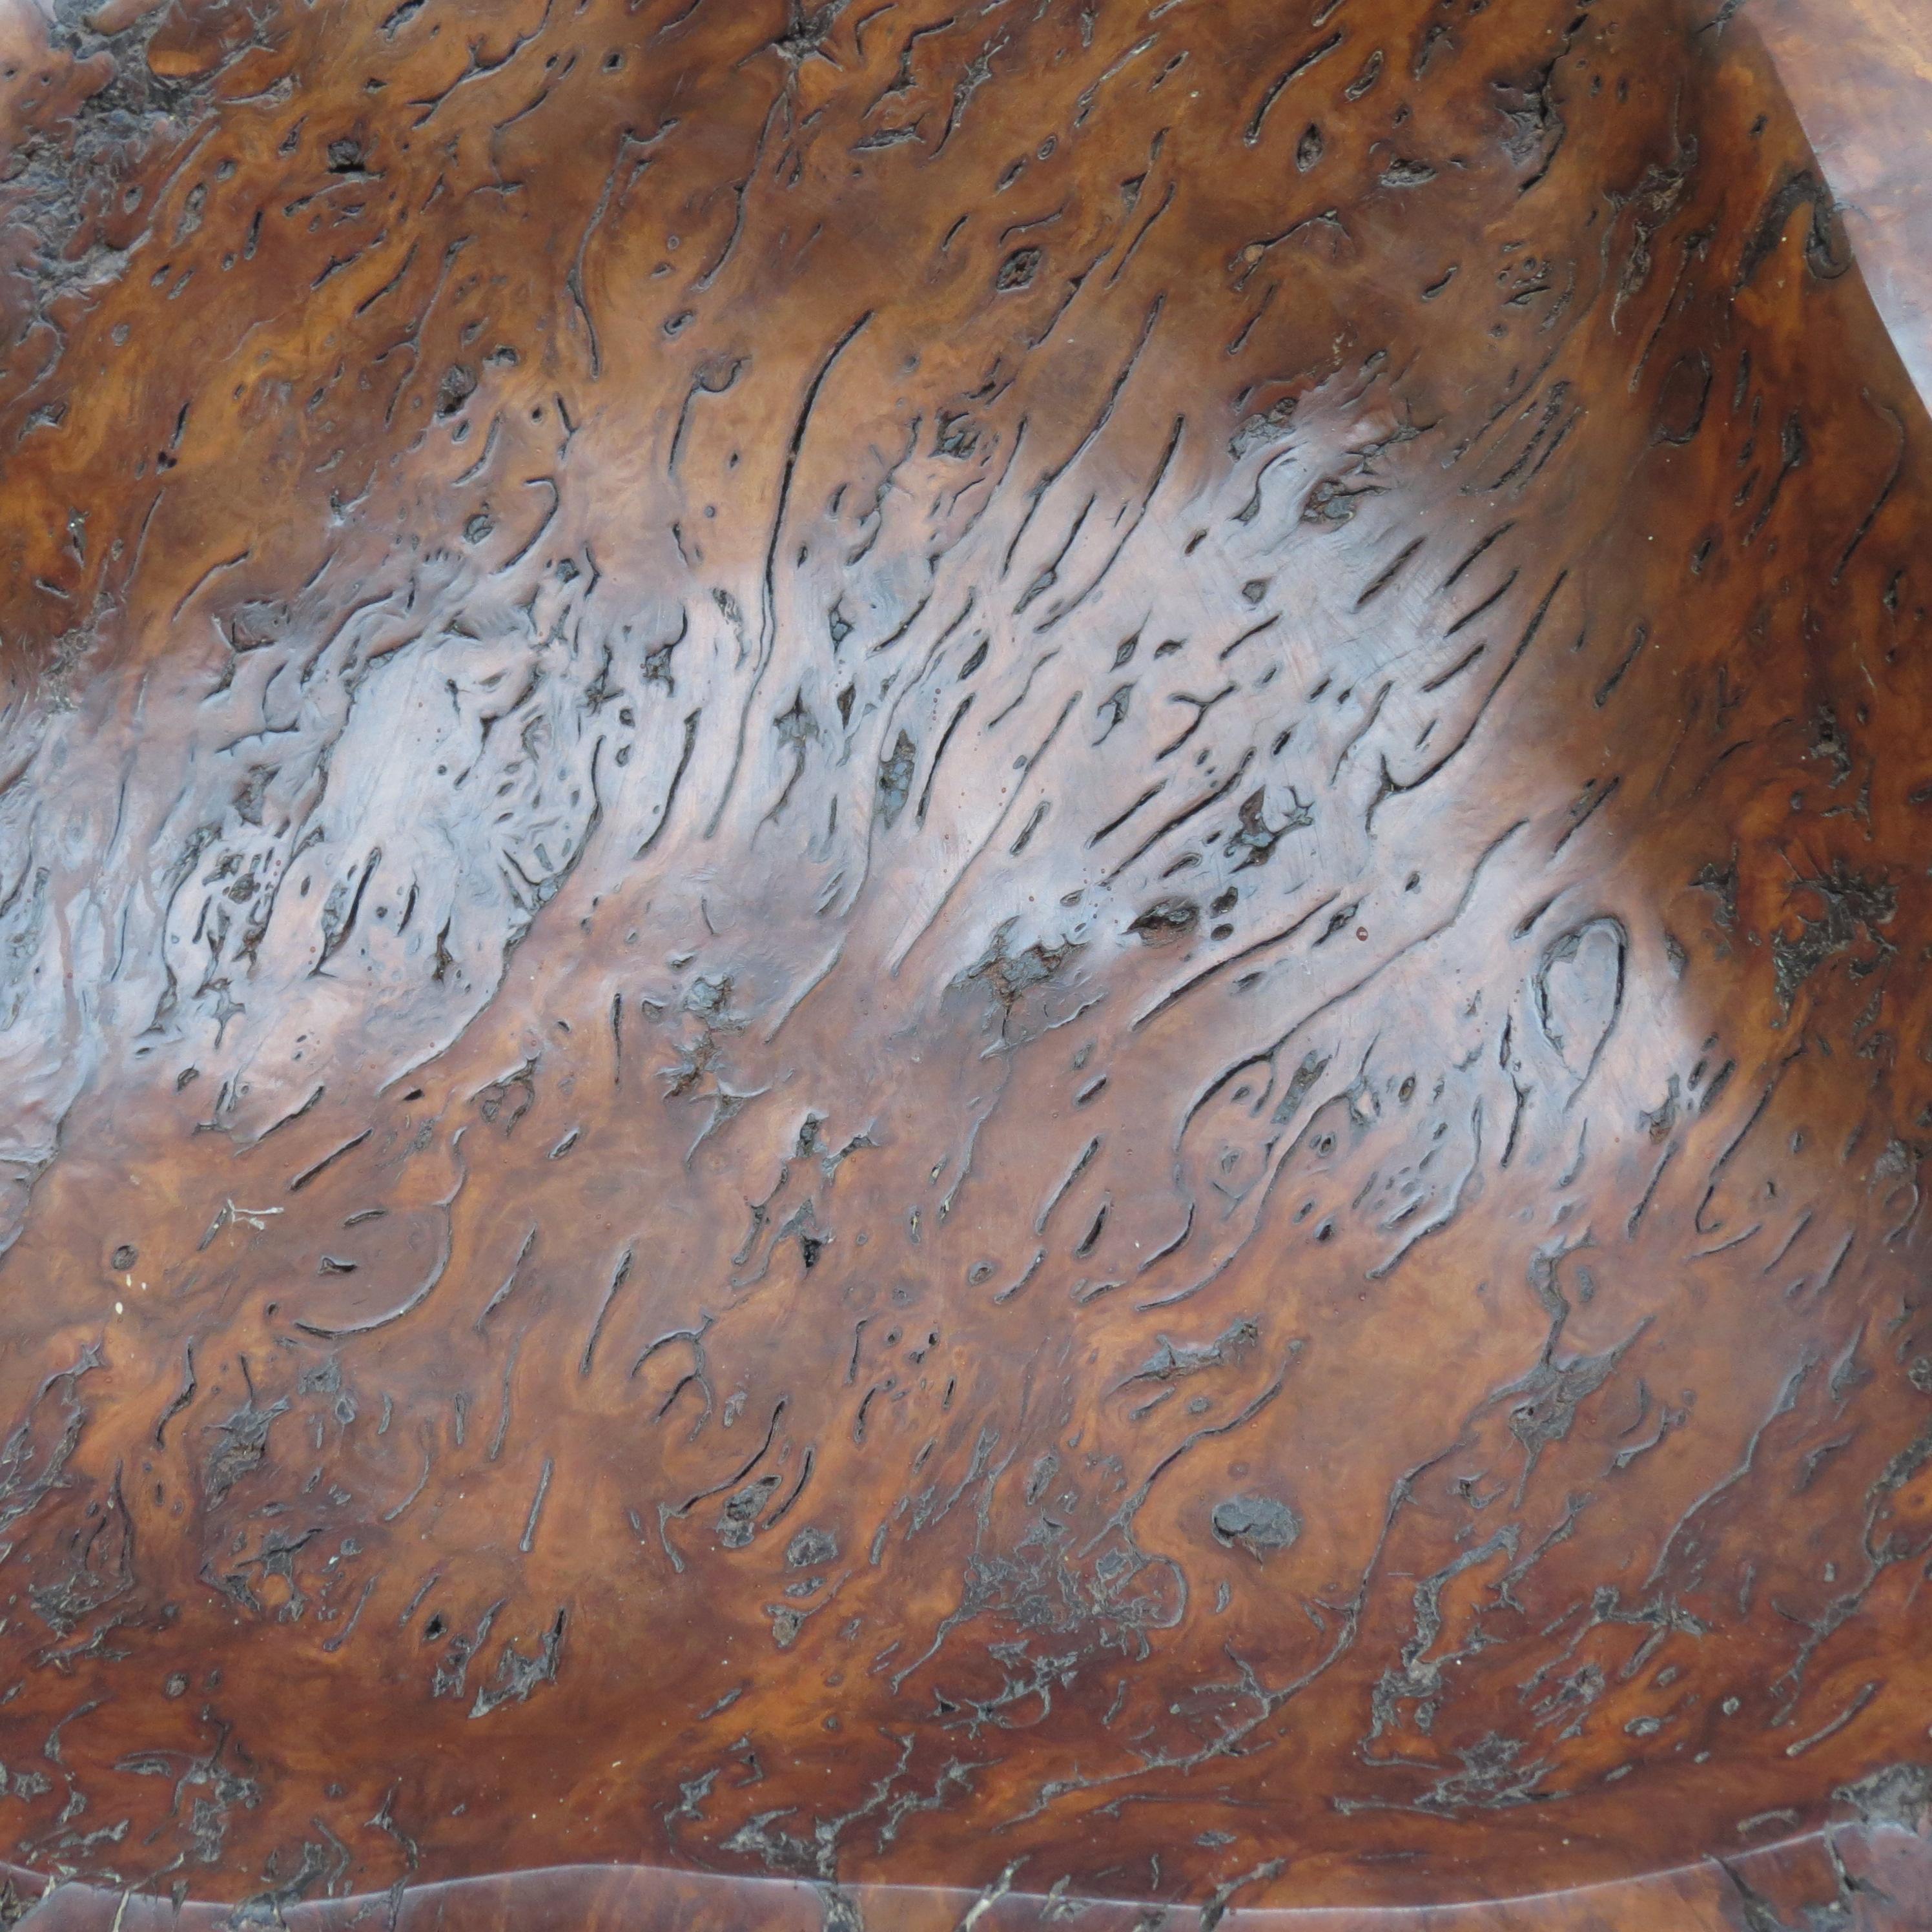 20th Century Very Large Hand Produced Bowl in River Red Gum Burr, Australian